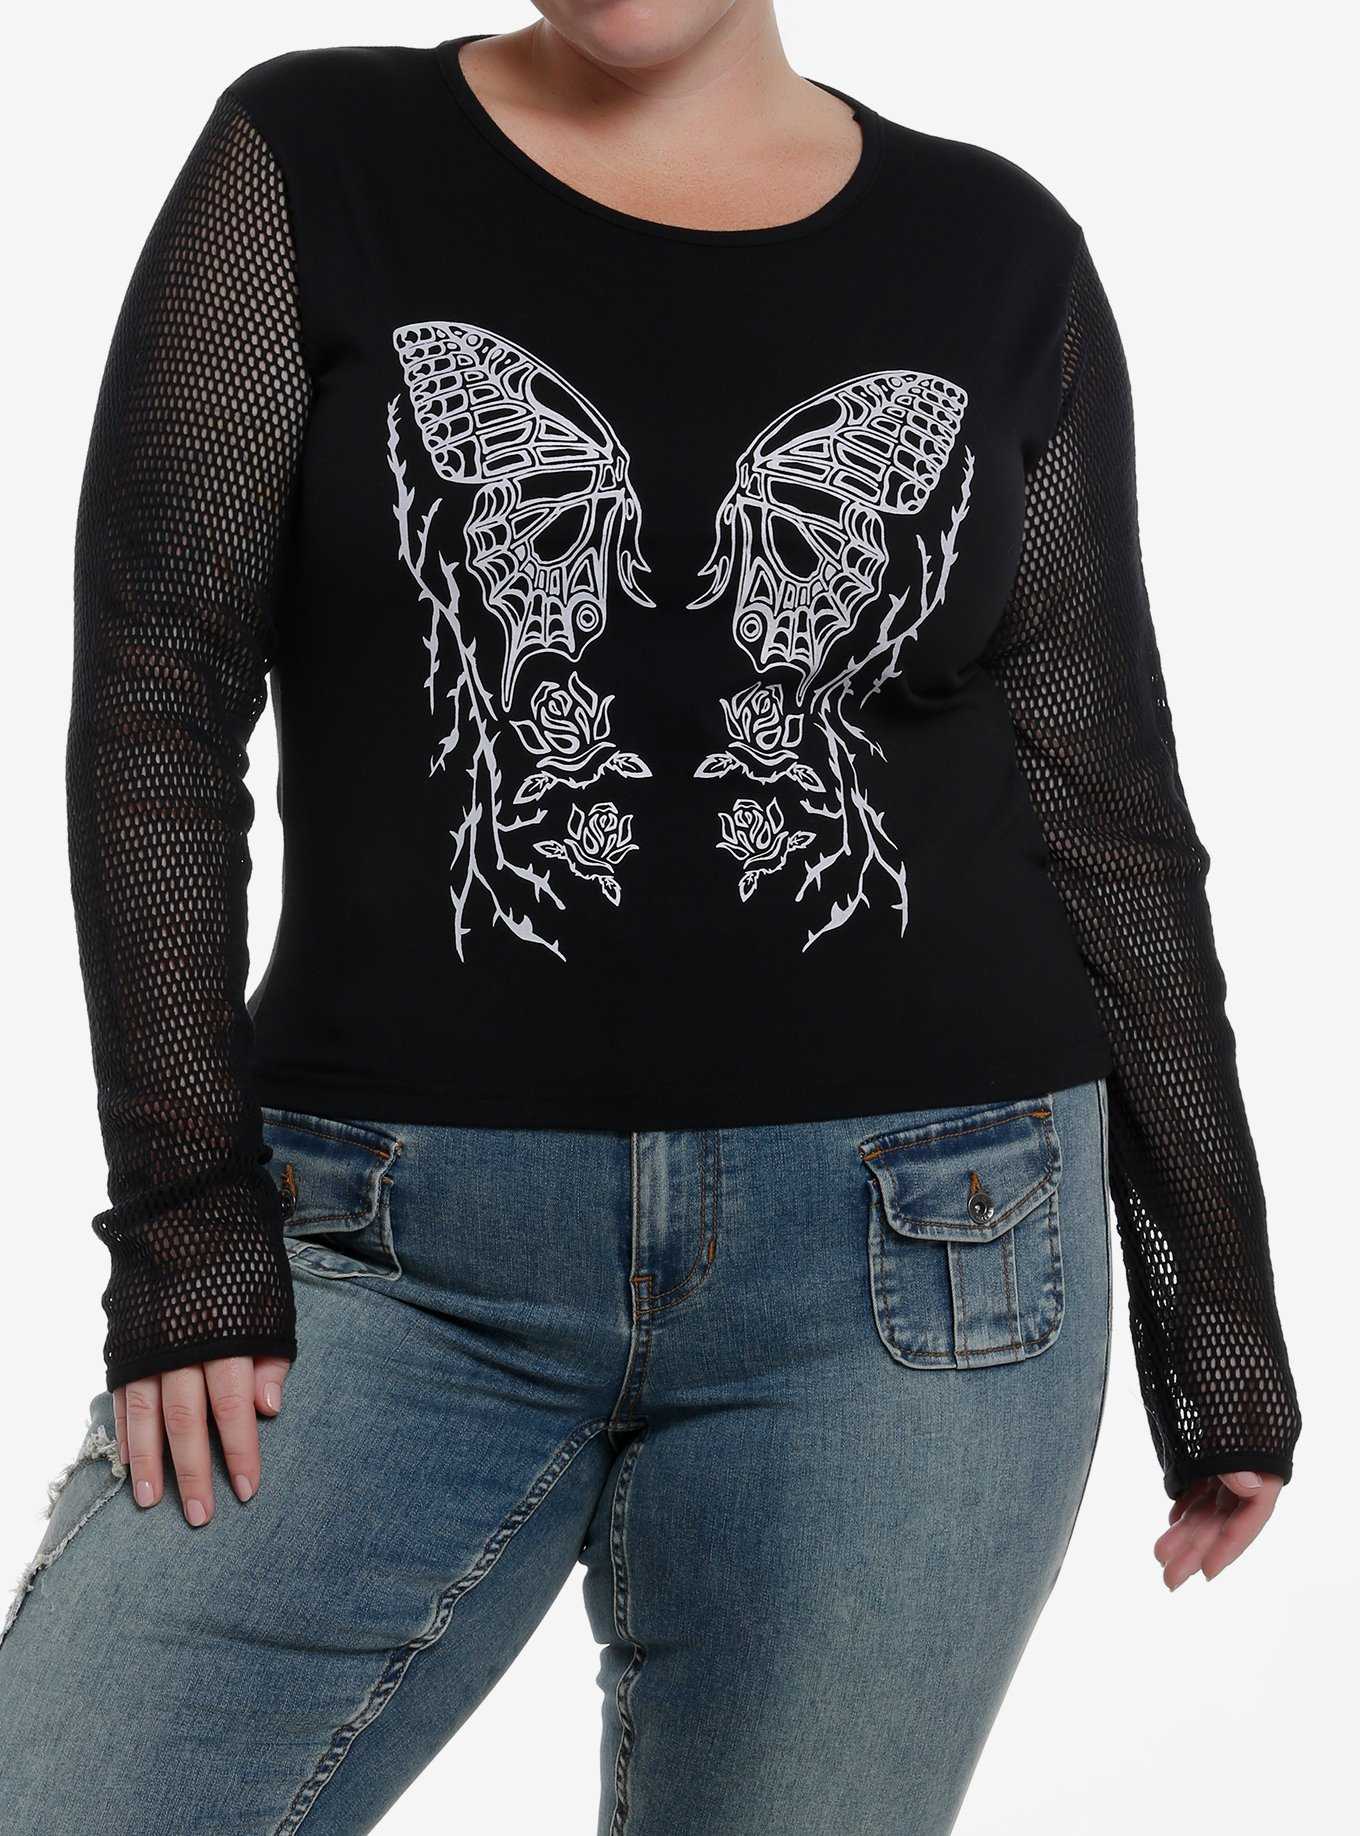 Butterfly Rose Mesh Girls Long-Sleeve Top Plus Size, , hi-res